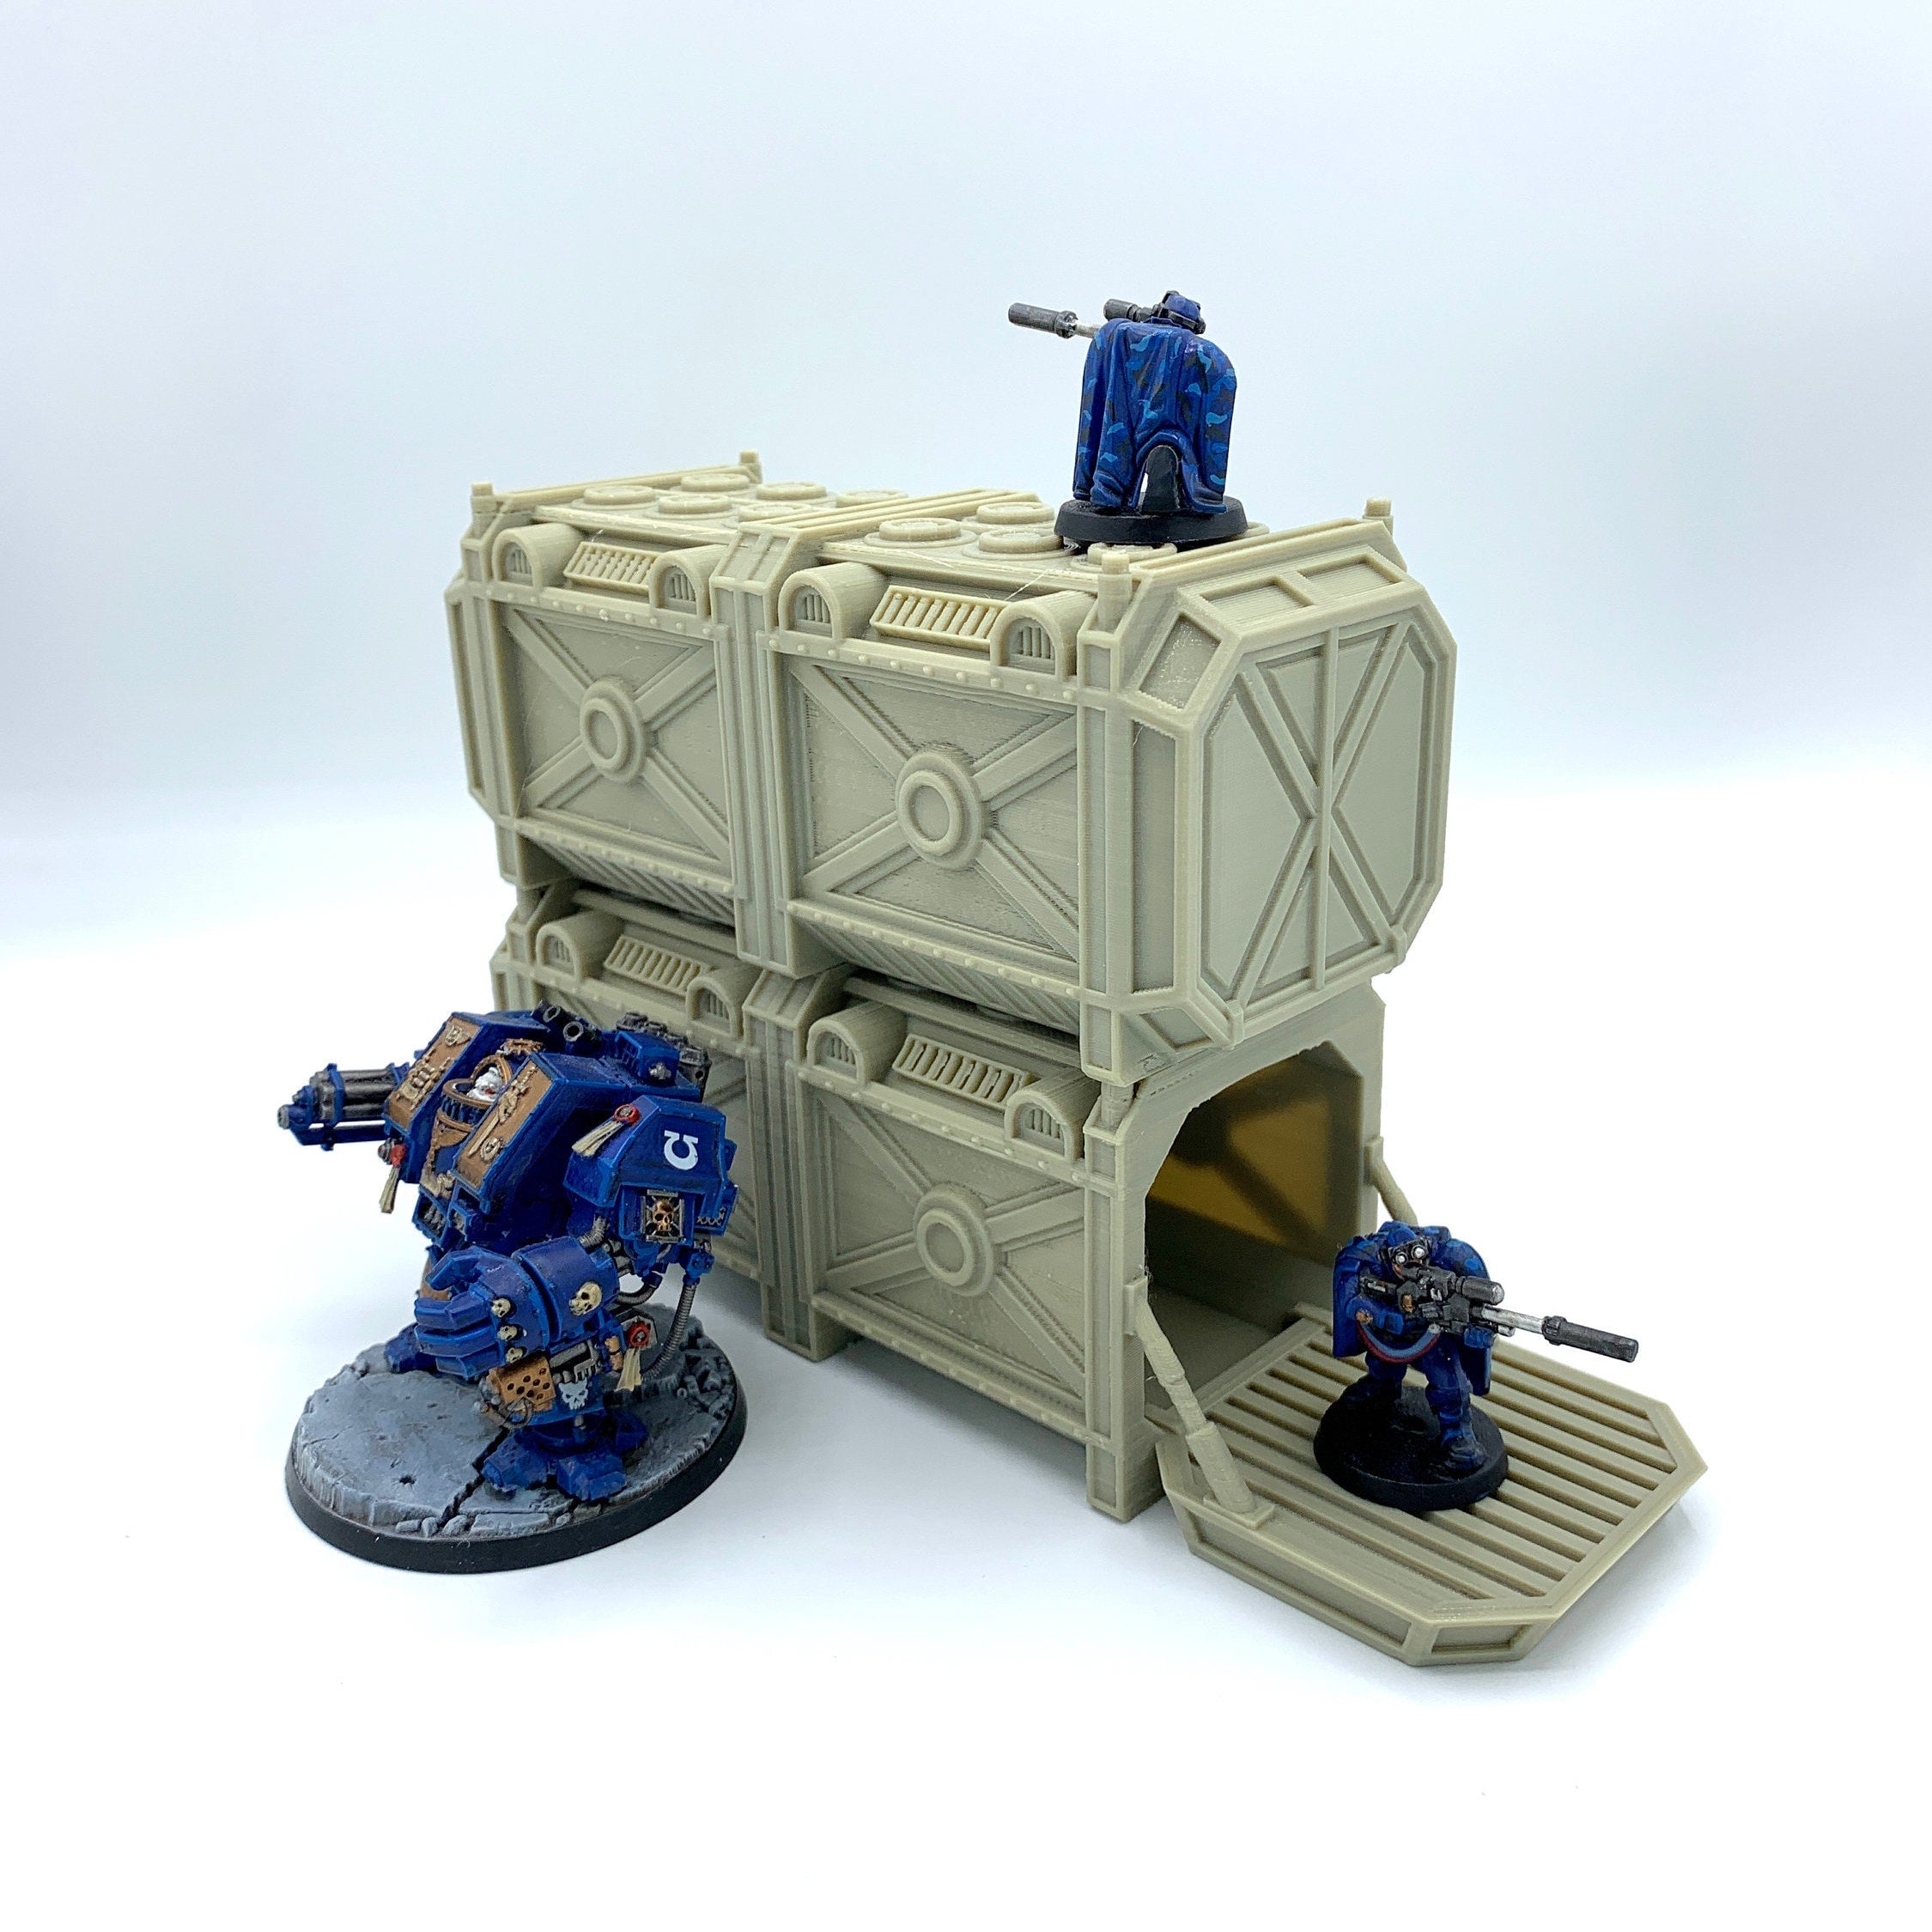 3d Printed / Sci-fi Shipping Containers /Star Wars Legion Compatible Pack/ Corvus Games Terrain Licensed Printer / Print to Order